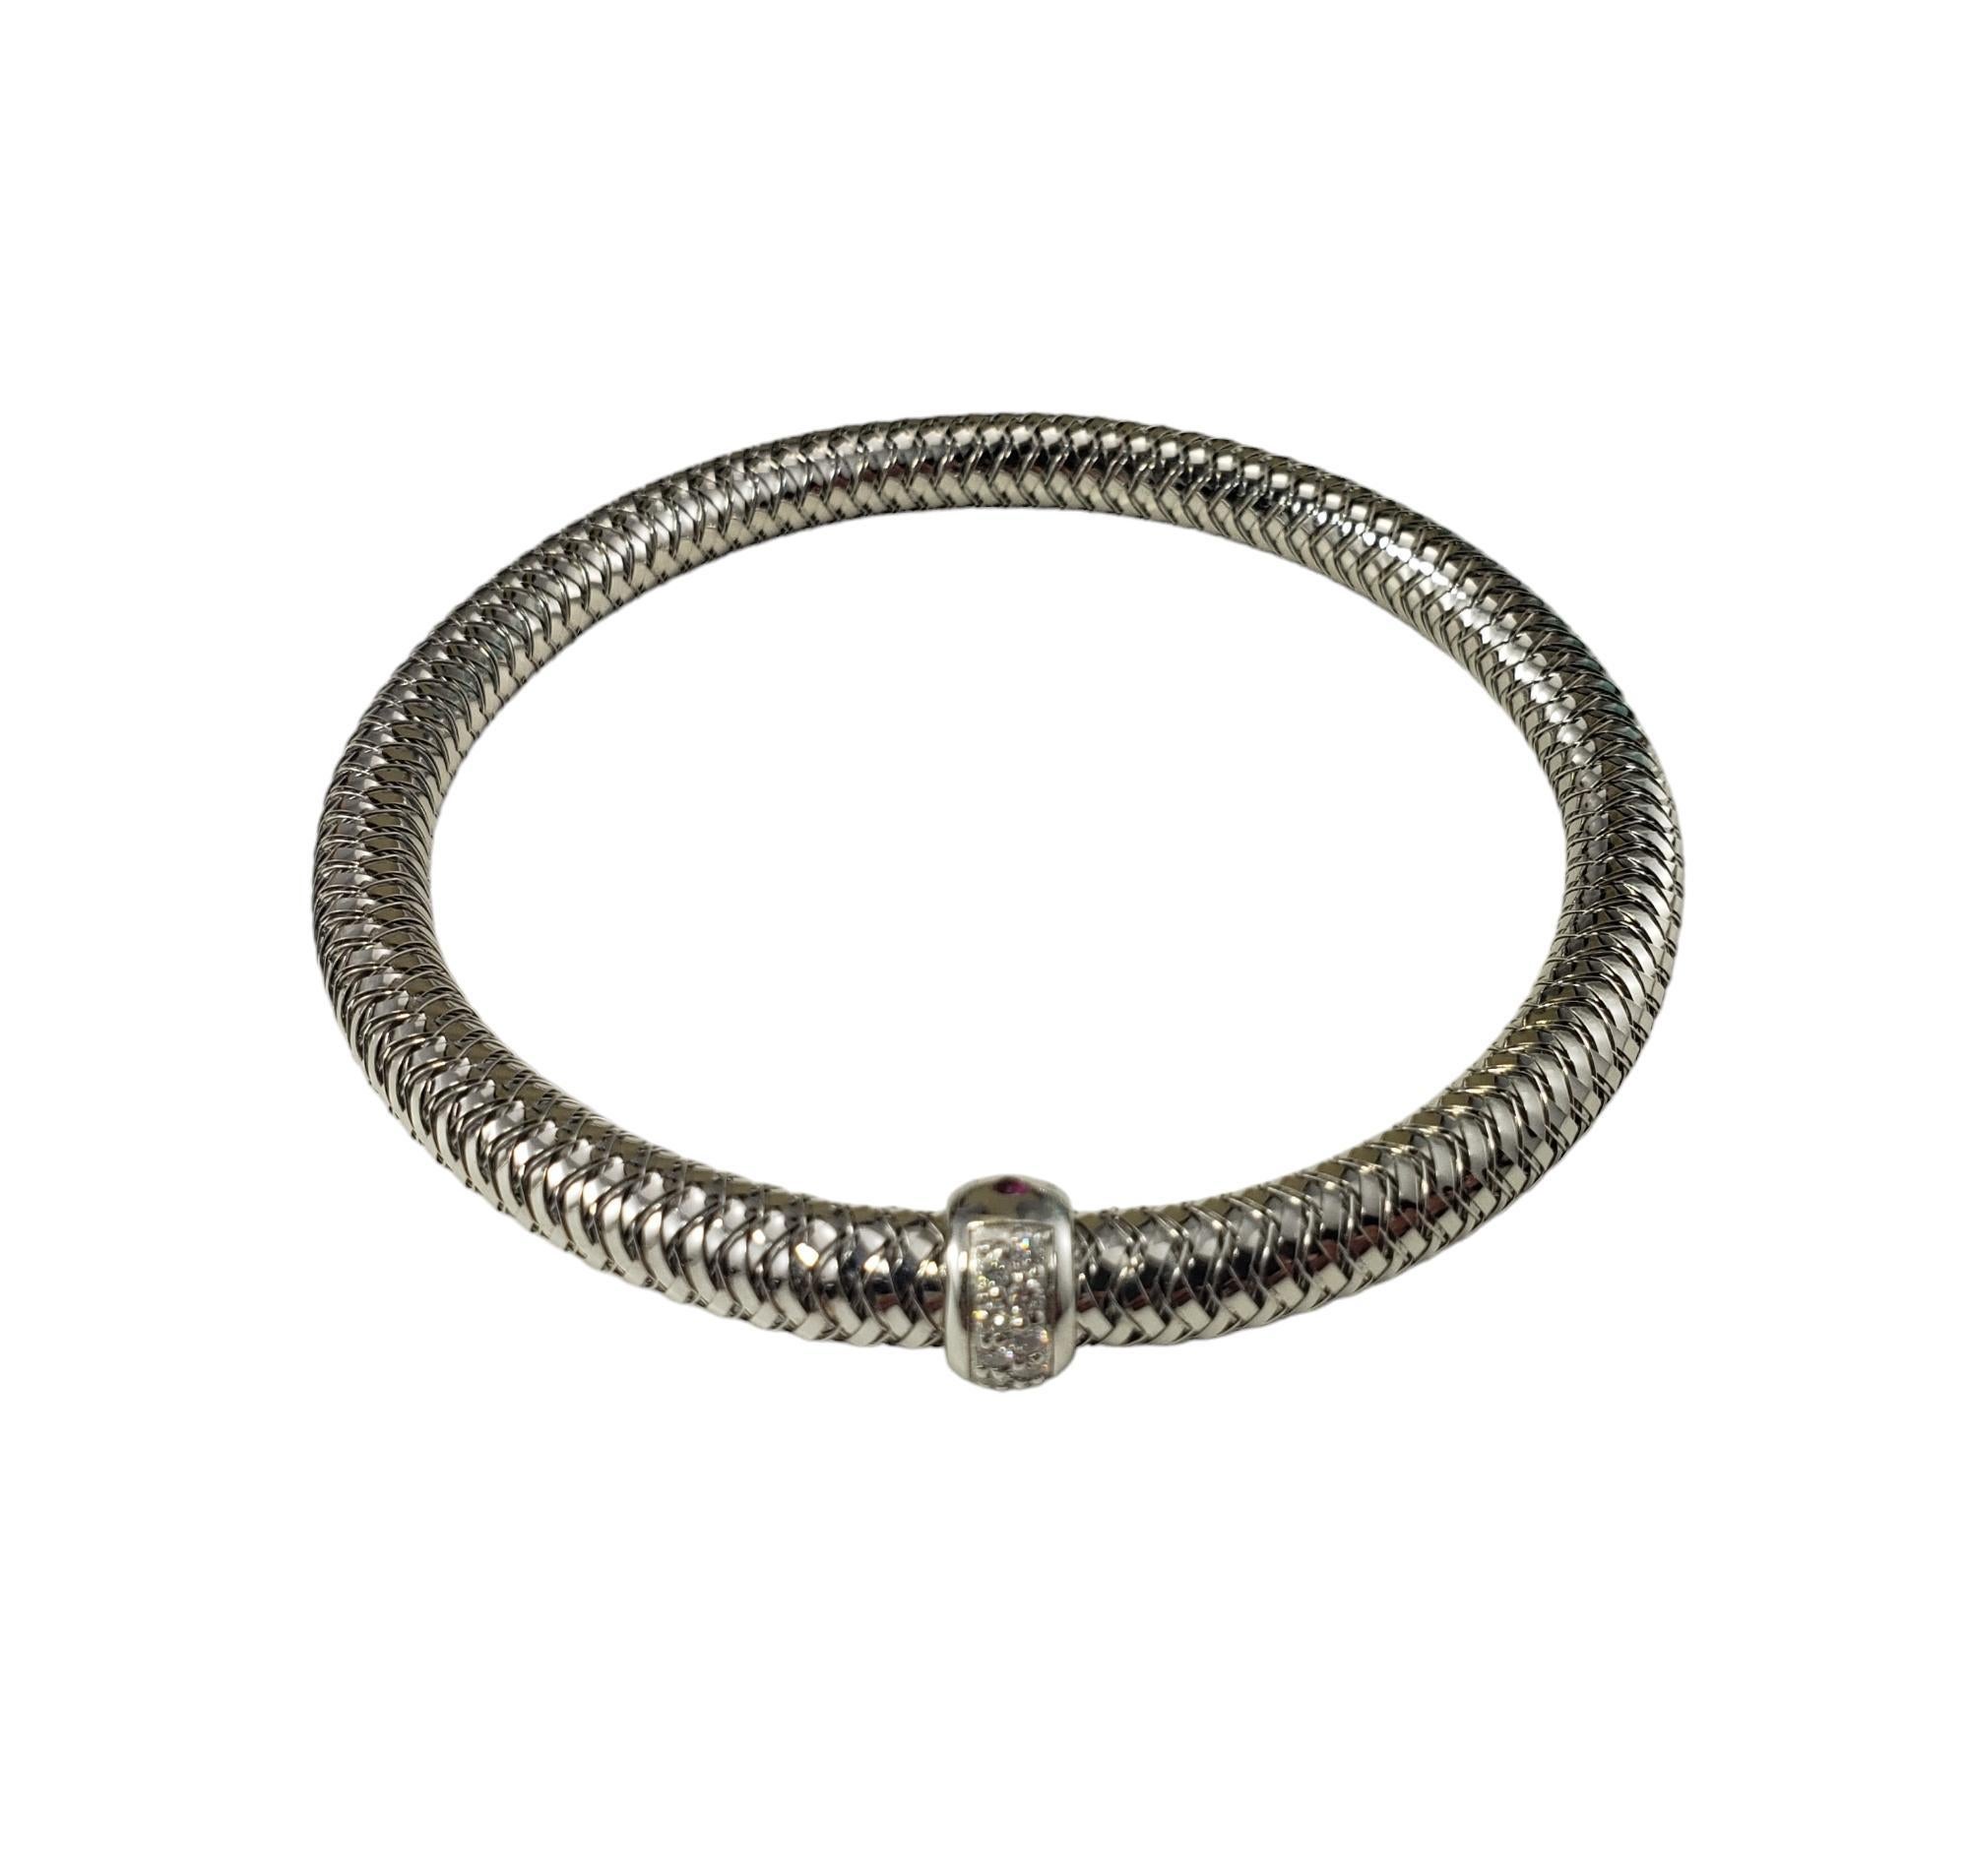 Roberto Coin 18K White Gold and Diamond Primavera Bracelet

This elegant bracelet by Roberto Coin is crafted in beautifully crosshatched 18K white gold with a diamond pave station.  

Width: 5.5 mm. 

Approximate total diamond weight: .22